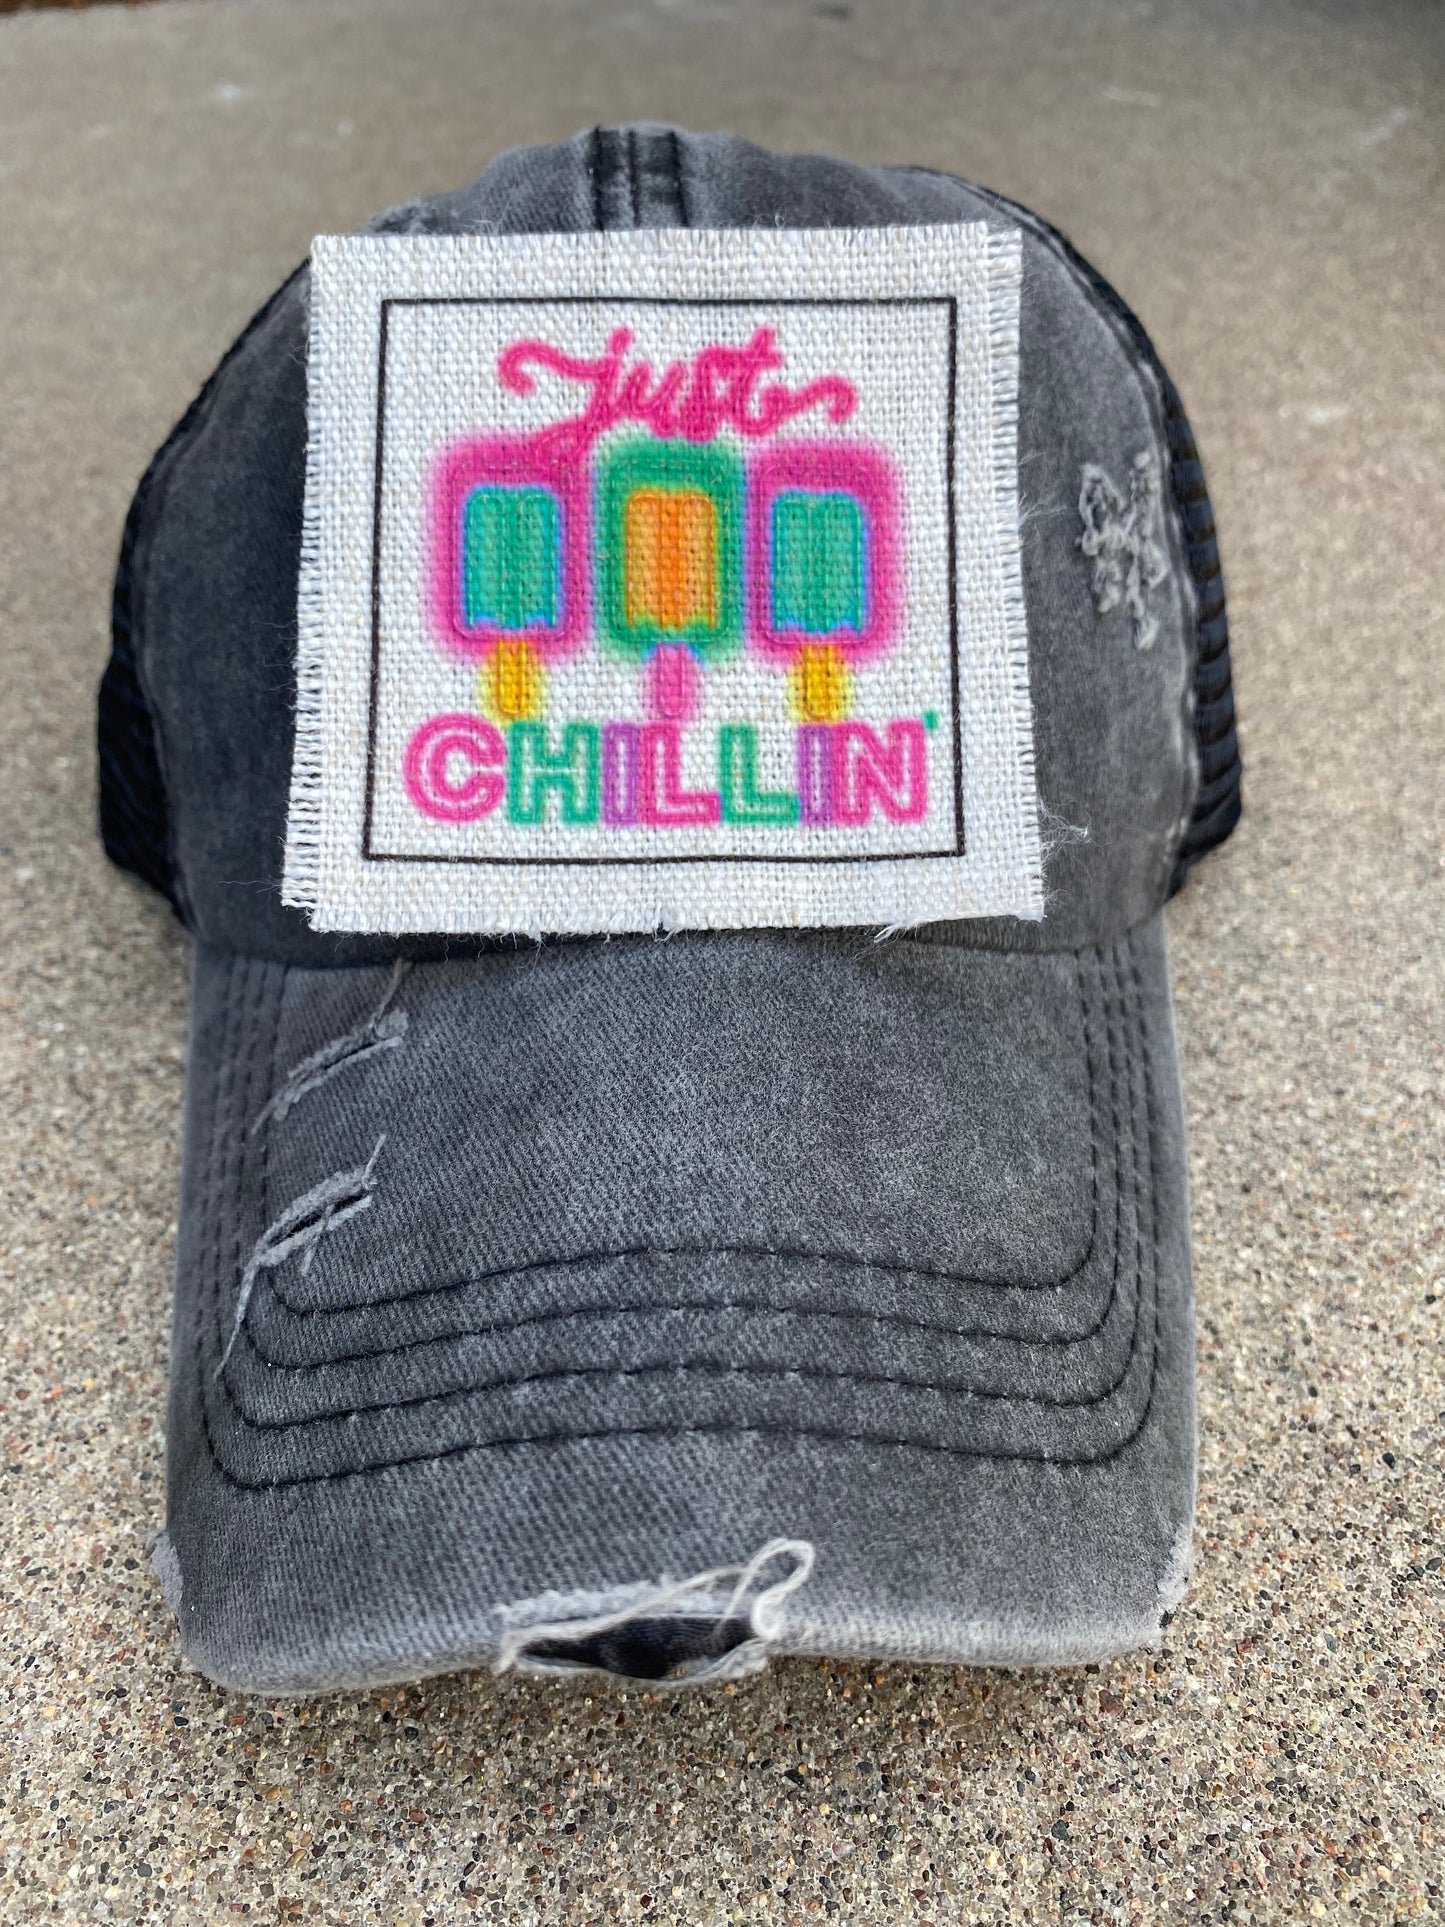 Just Chillin' Neon Hat Patch